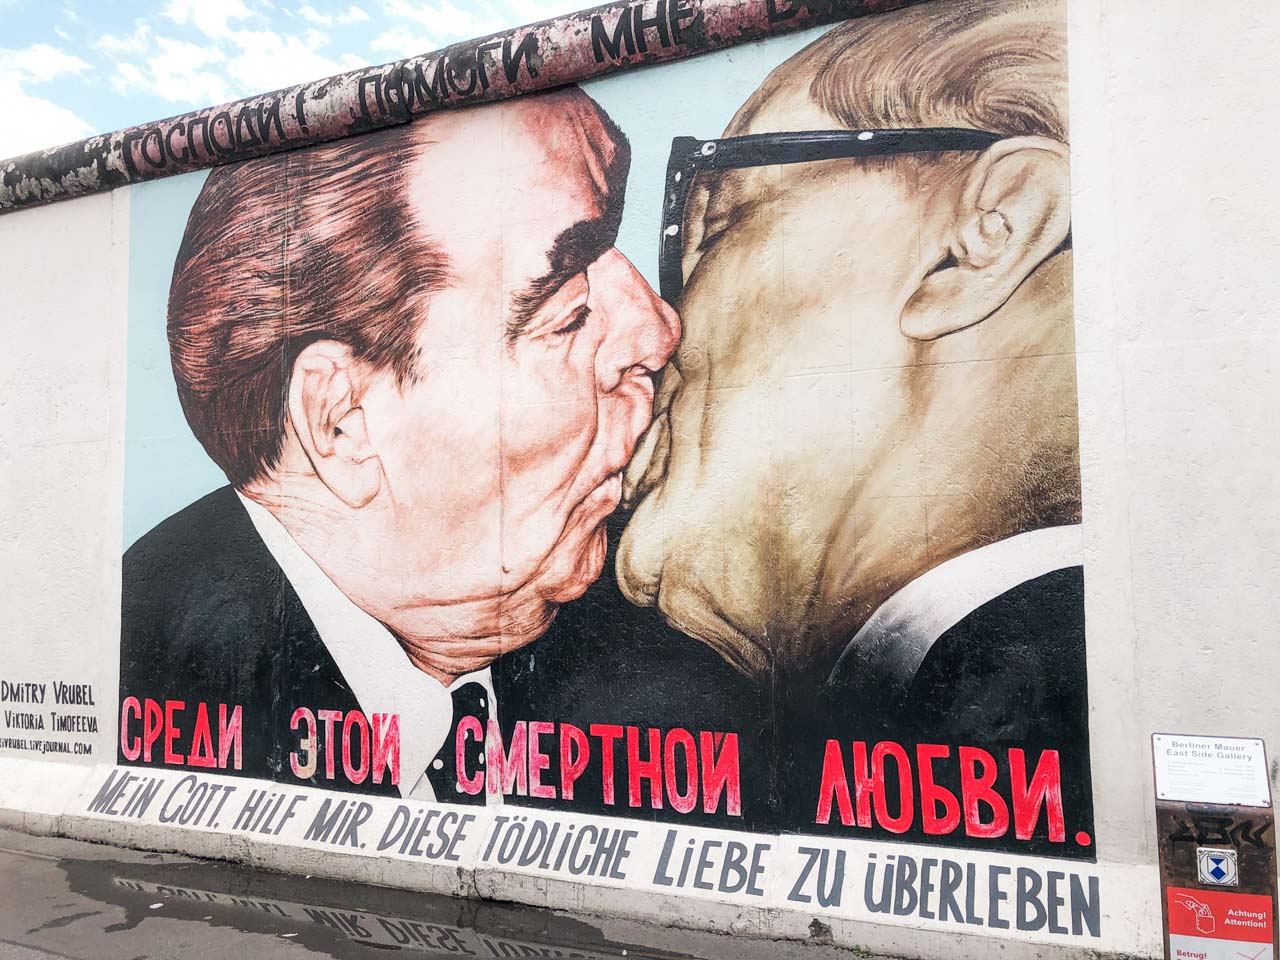 'My God, Help Me to Survive This Deadly Love' (Fraternal Kiss) mural at Berlin's East Side Gallery